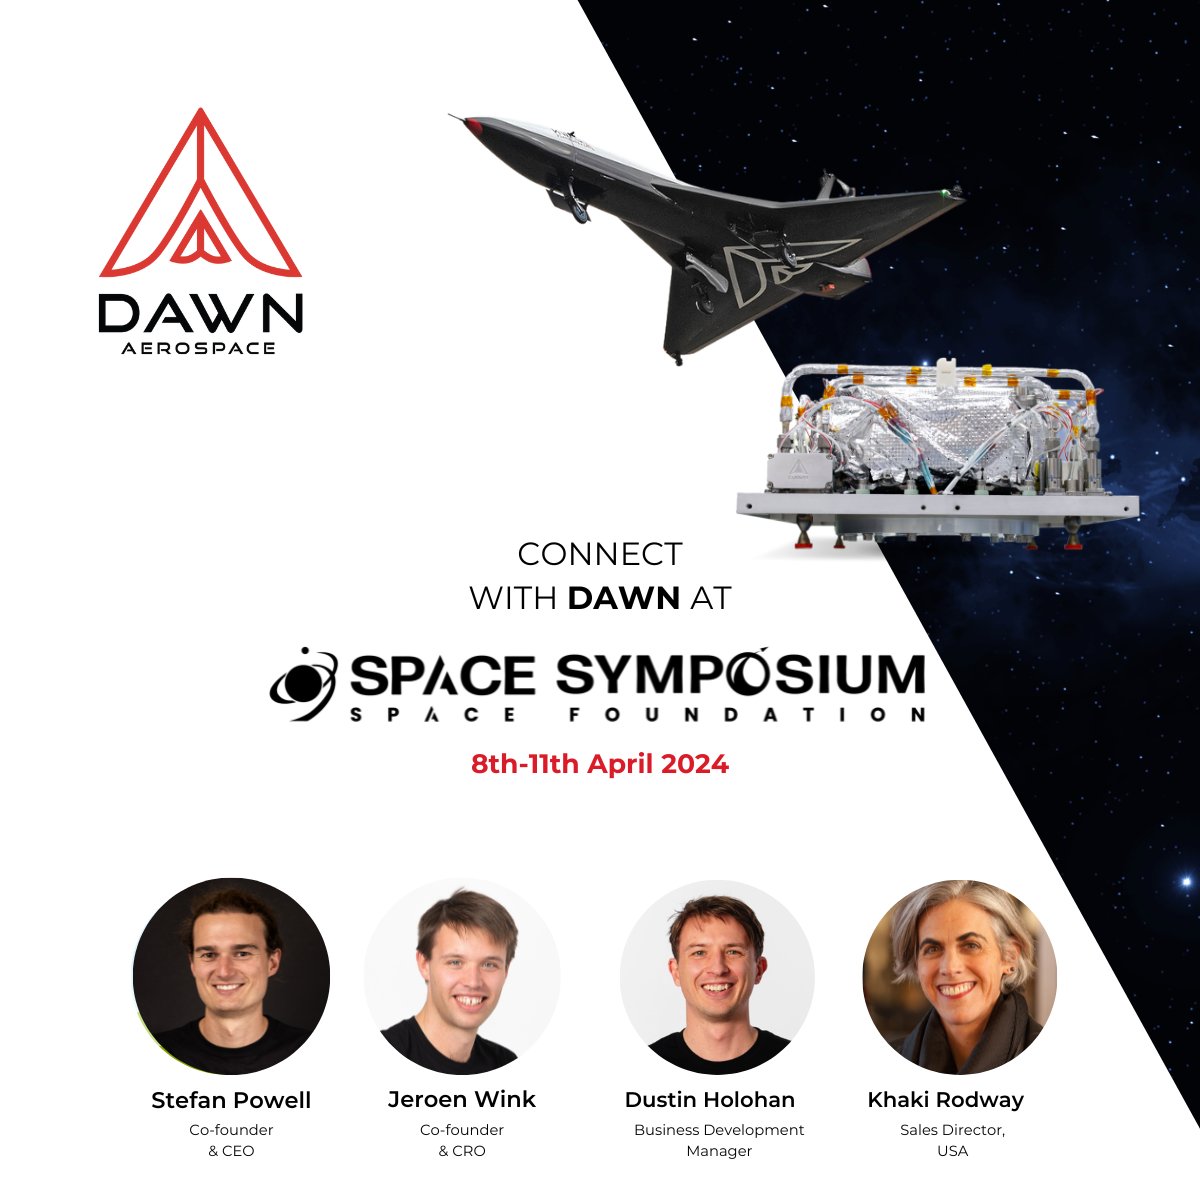 Heading to Space Symposium? So are we ✨ Reach out to @Stefan__Powell, @khakirodway, Jeroen Wink or Dustin Holohan to talk about low-cost green chemical propulsion and rocket-powered aircraft 🚀🌱🛰 #greenpropulsion #MkIIAurora